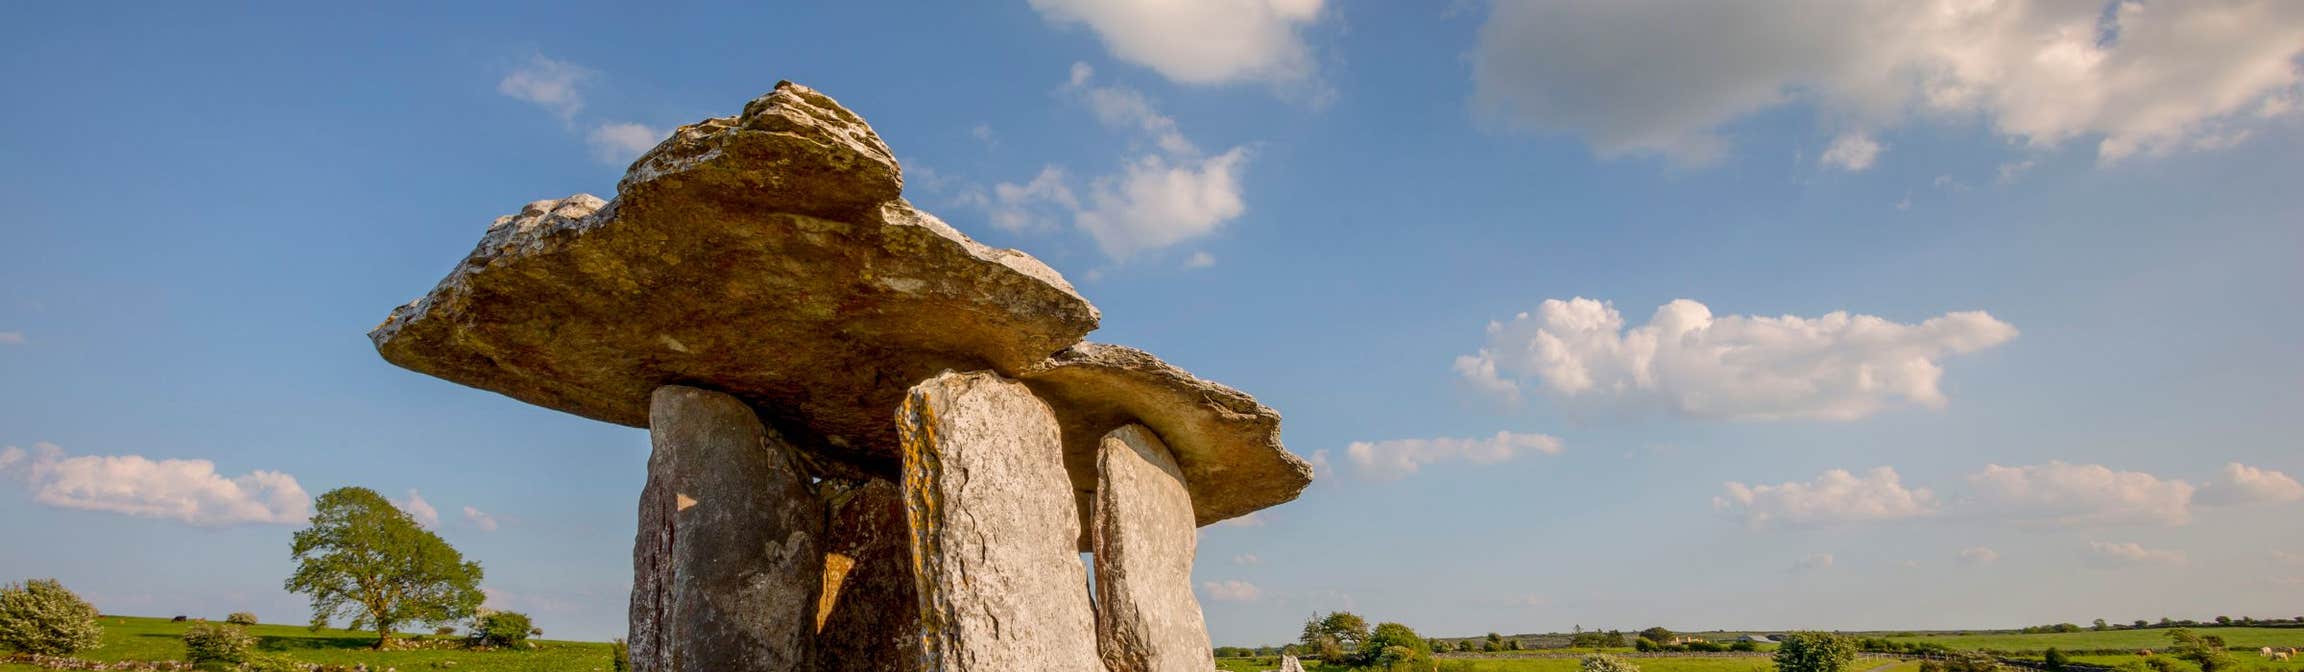 Image of the Burren Poulnabrone Dolmen in County Clare